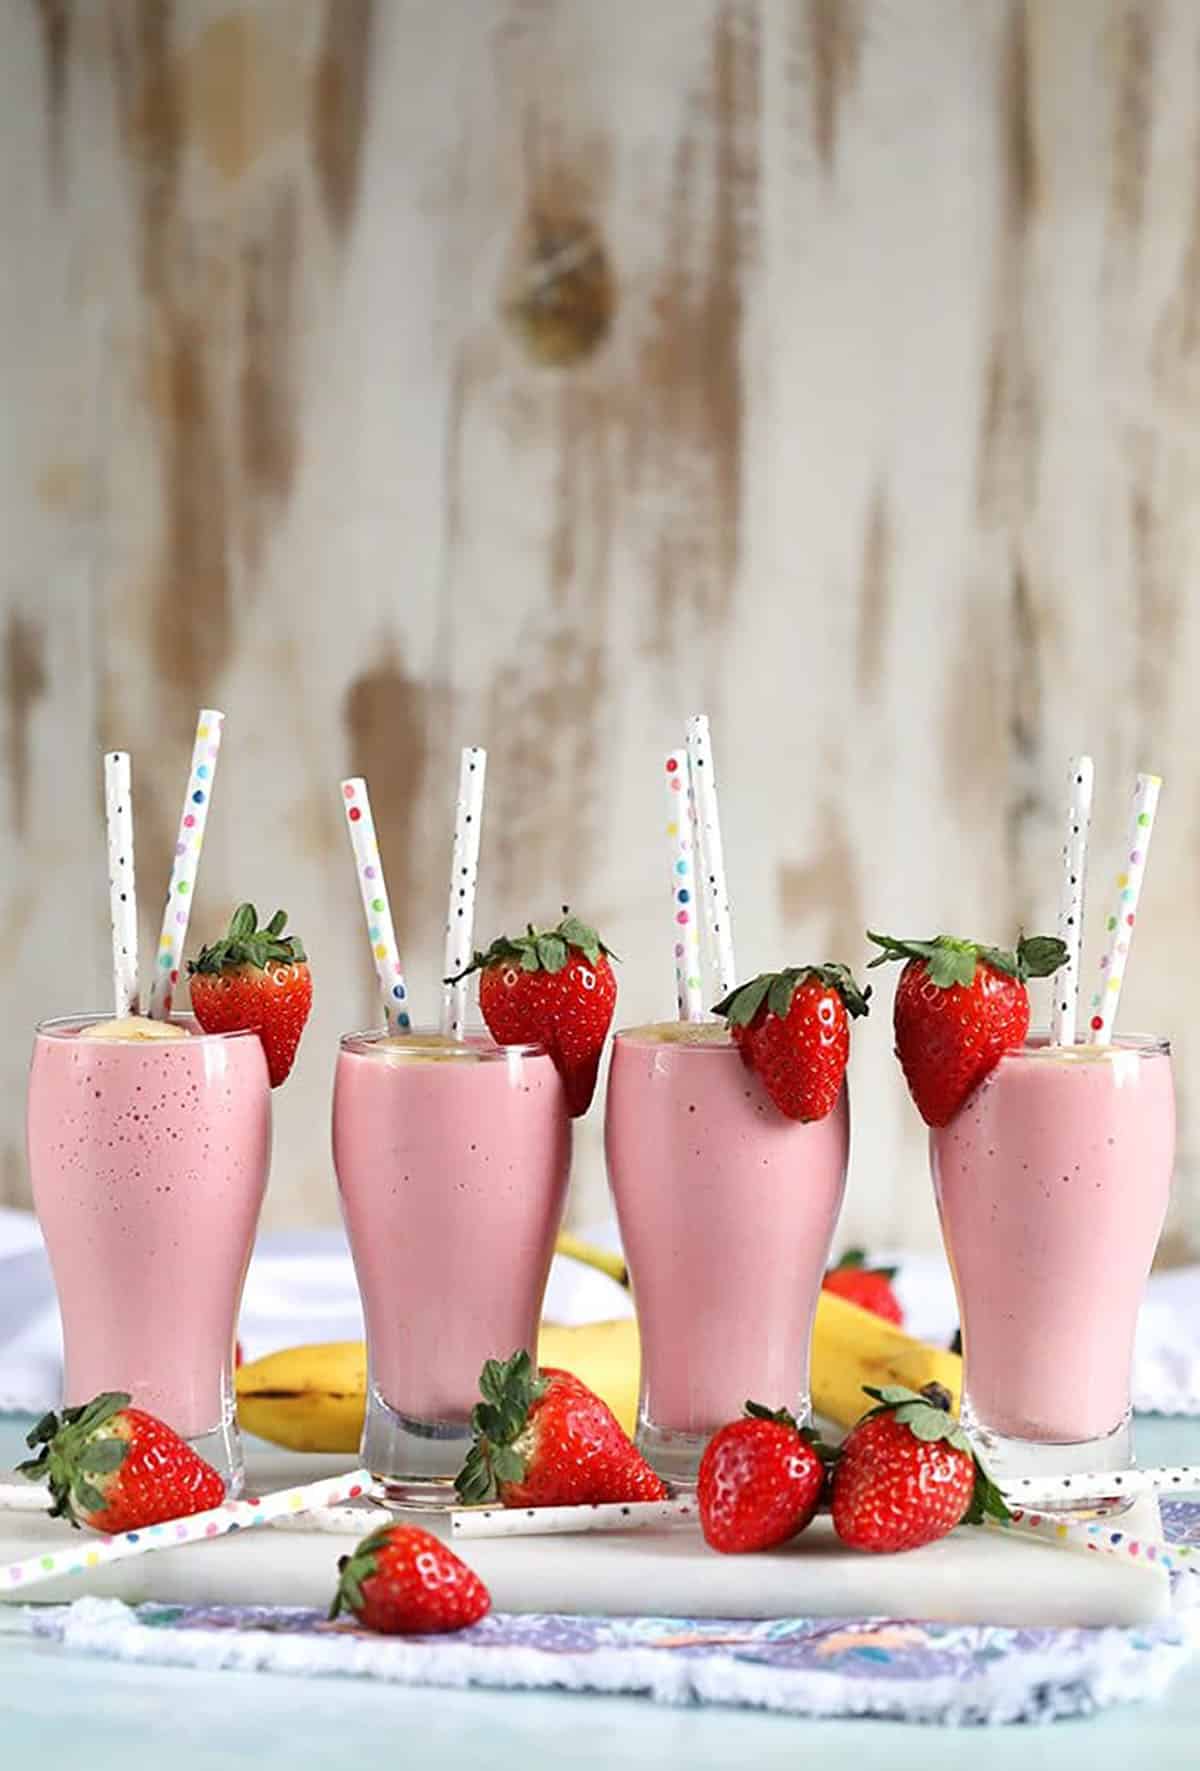 Four Strawberry Banana Smoothies arranged on a marble board with fresh strawberries.